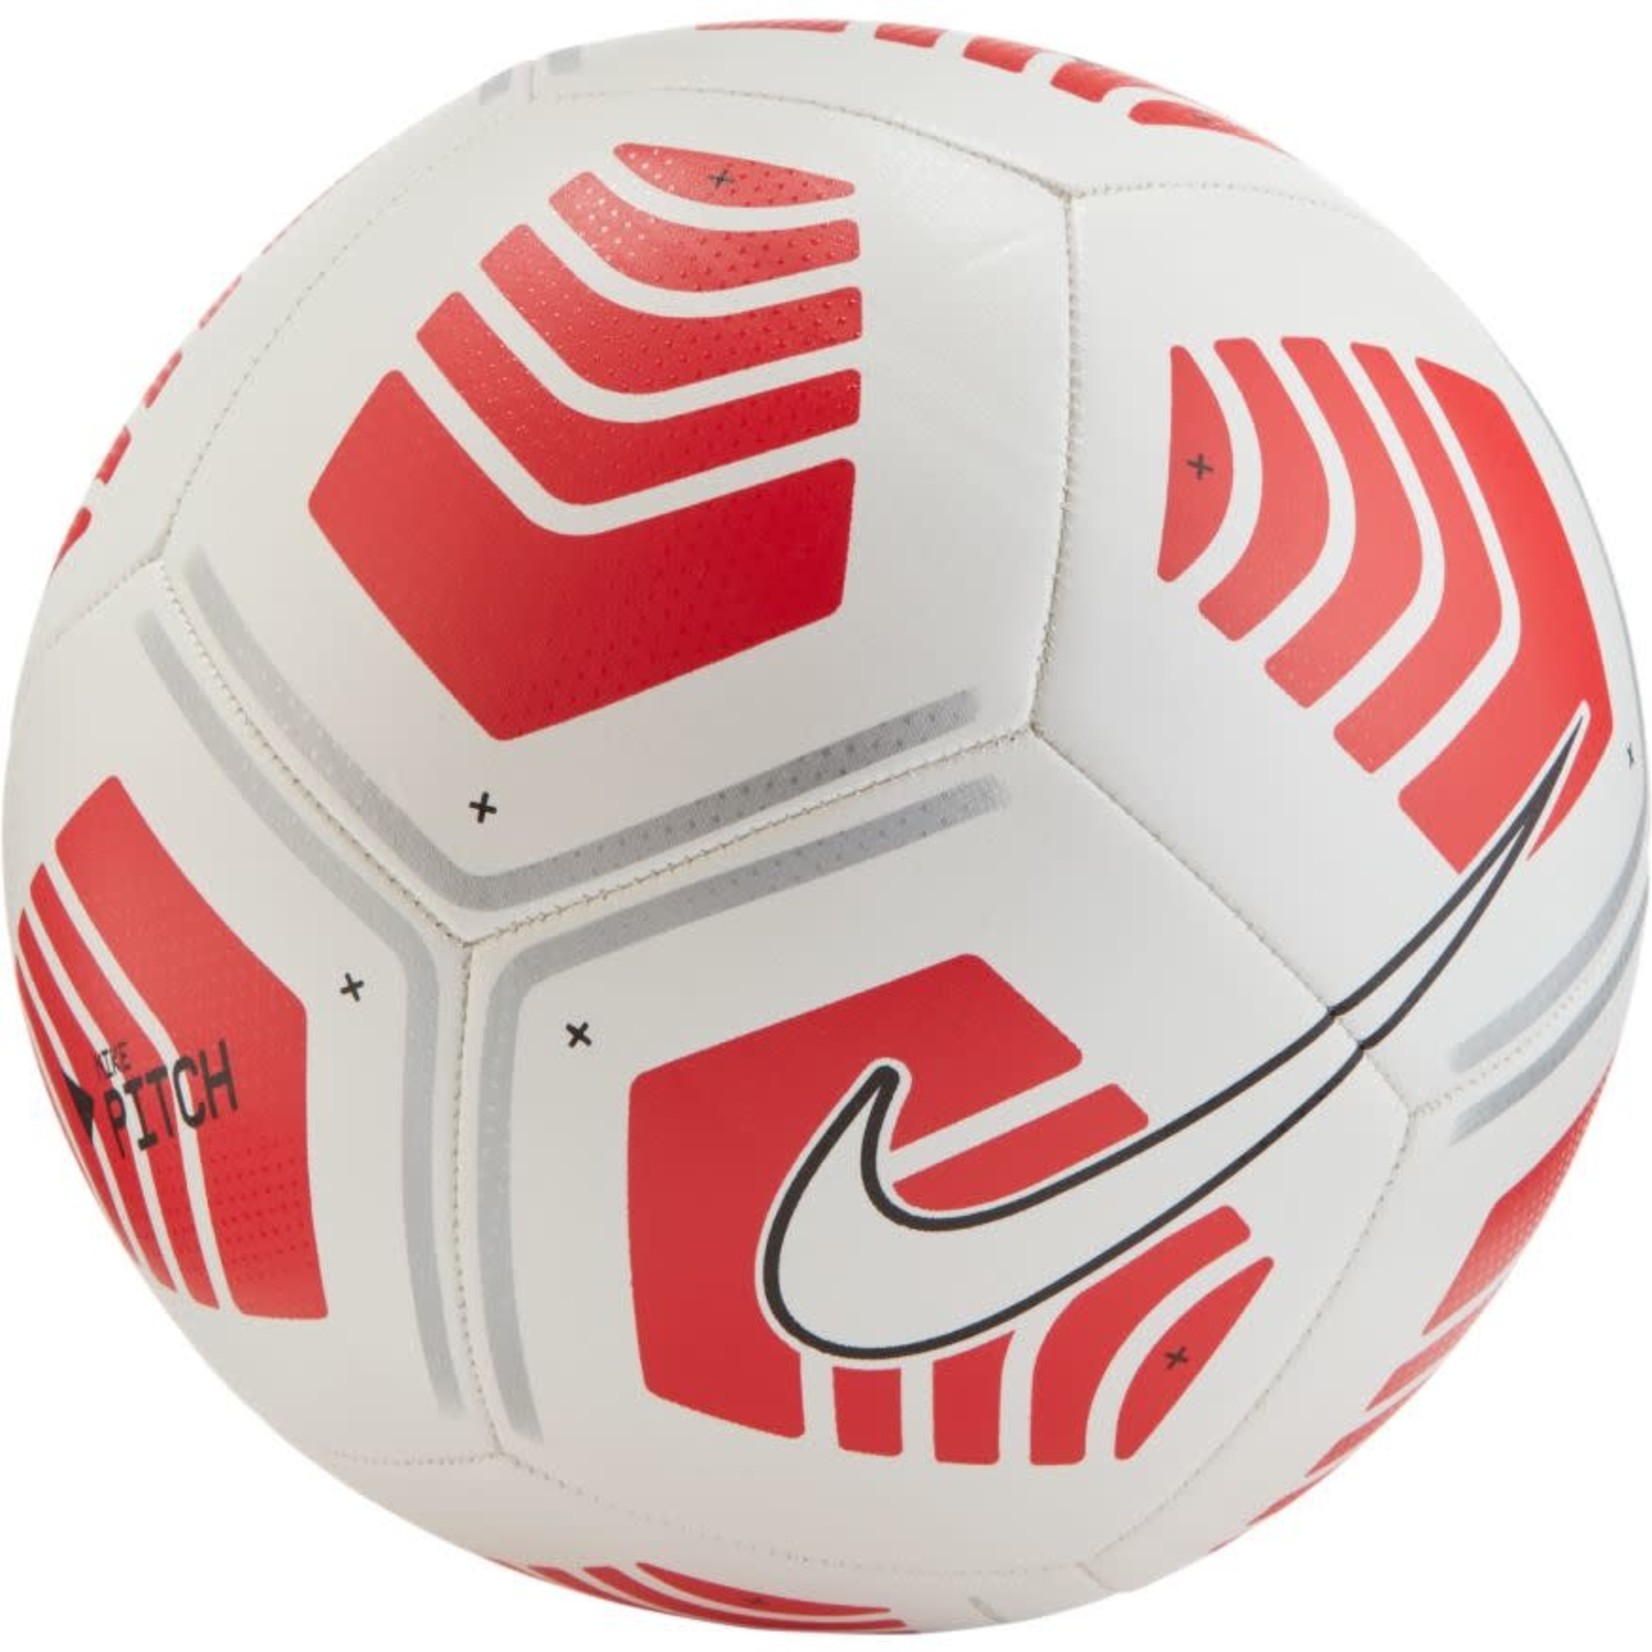 NIKE PITCH BALL 20/21 (WHITE/RED)